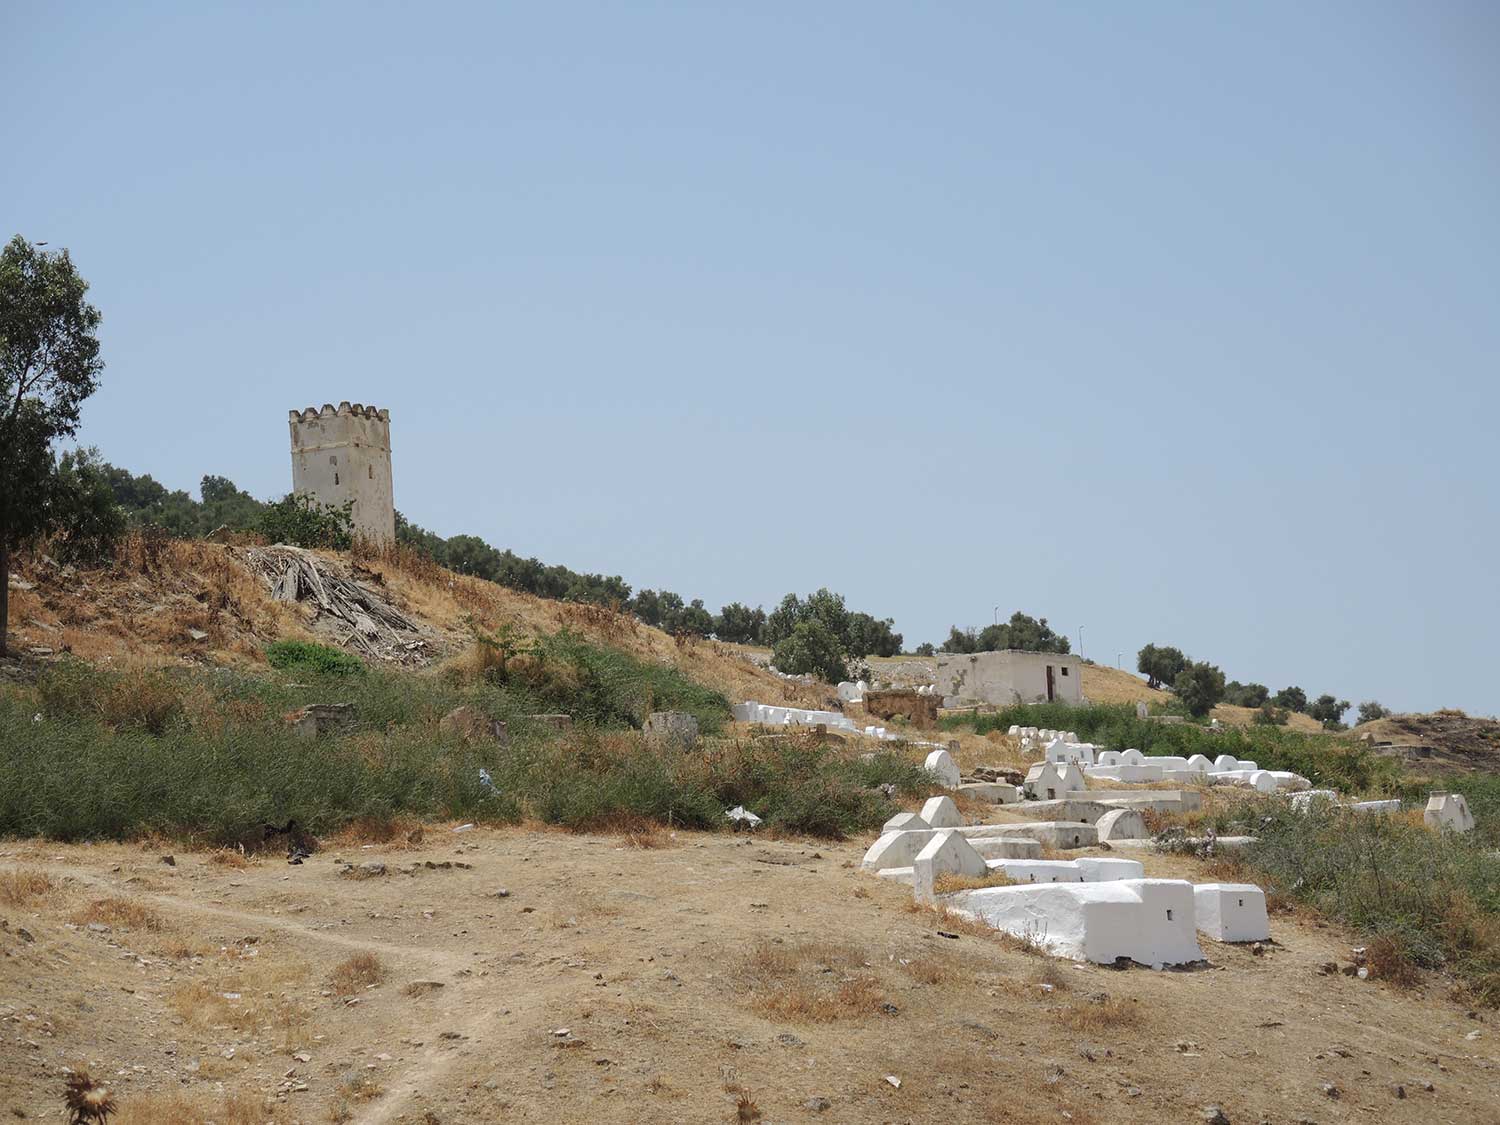 View of the tombs and cemetery